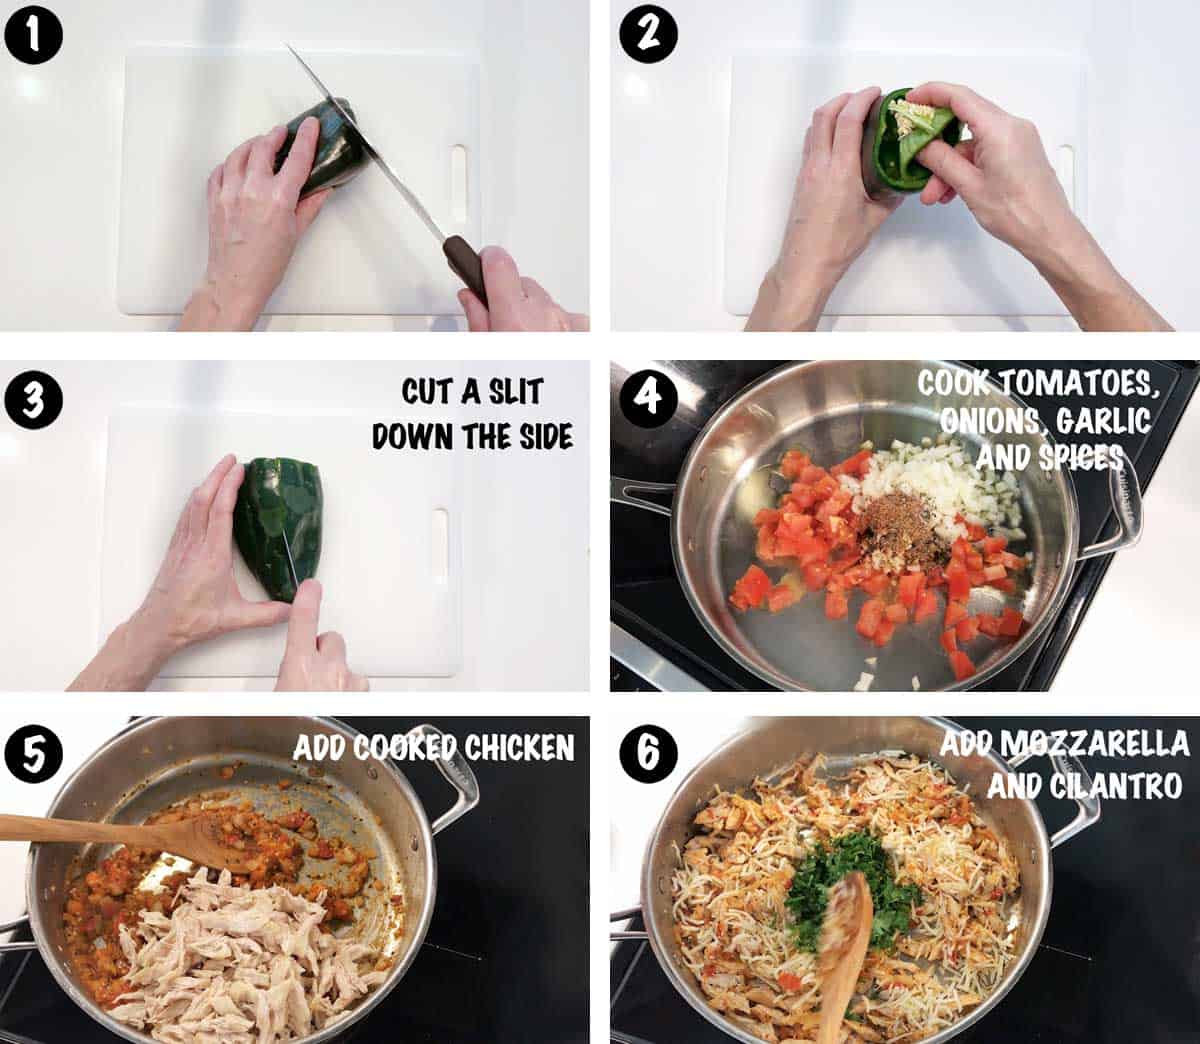 A photo collage showing steps 1-6 for making stuffed poblano peppers. 